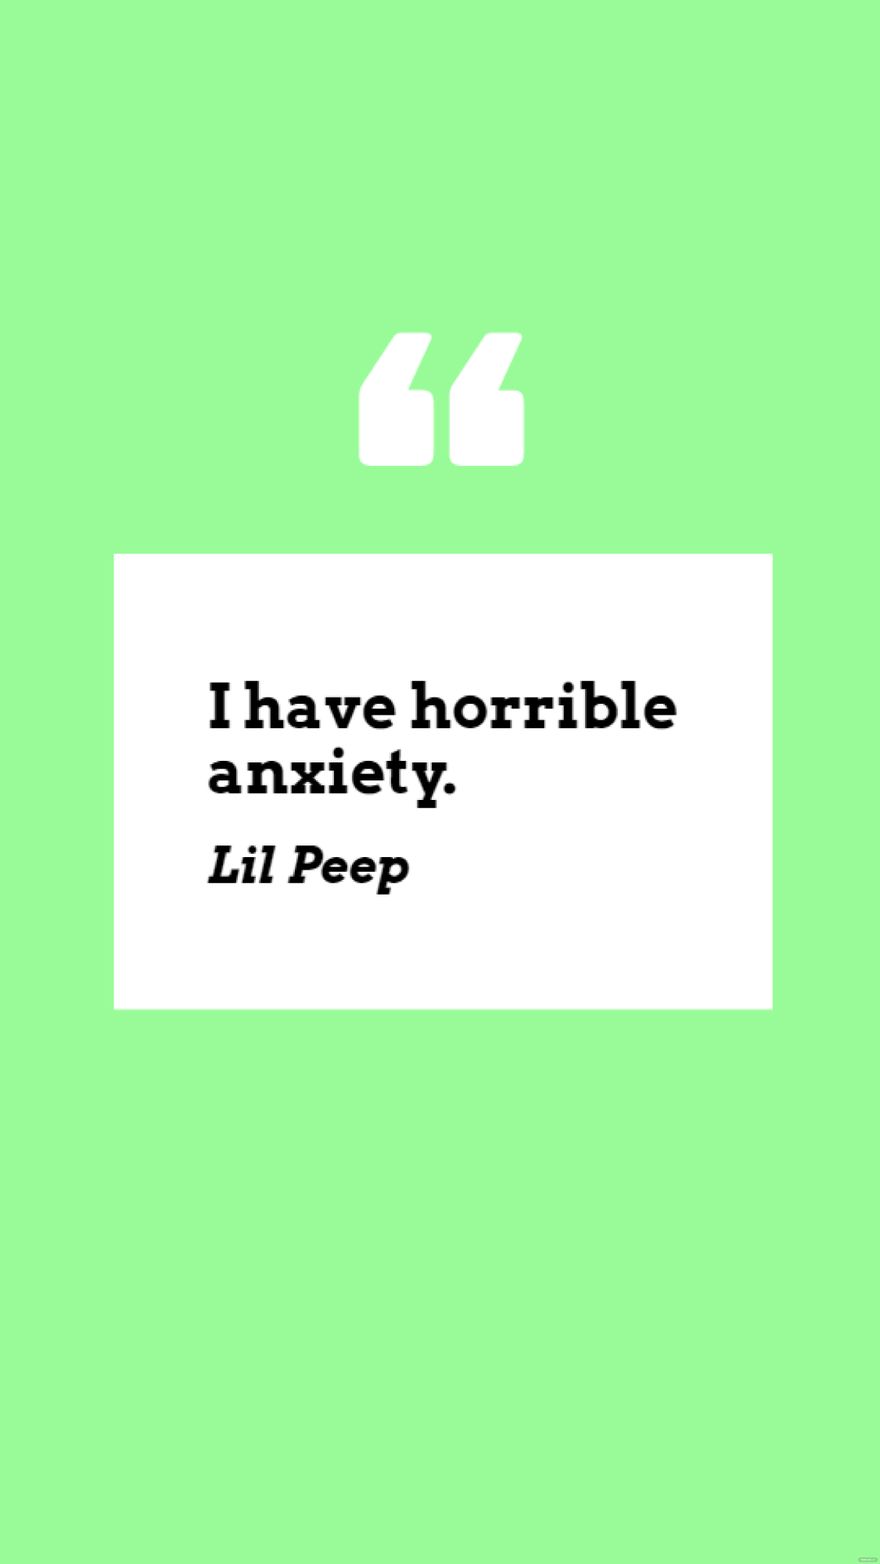 Lil Peep - I have horrible anxiety. in JPG